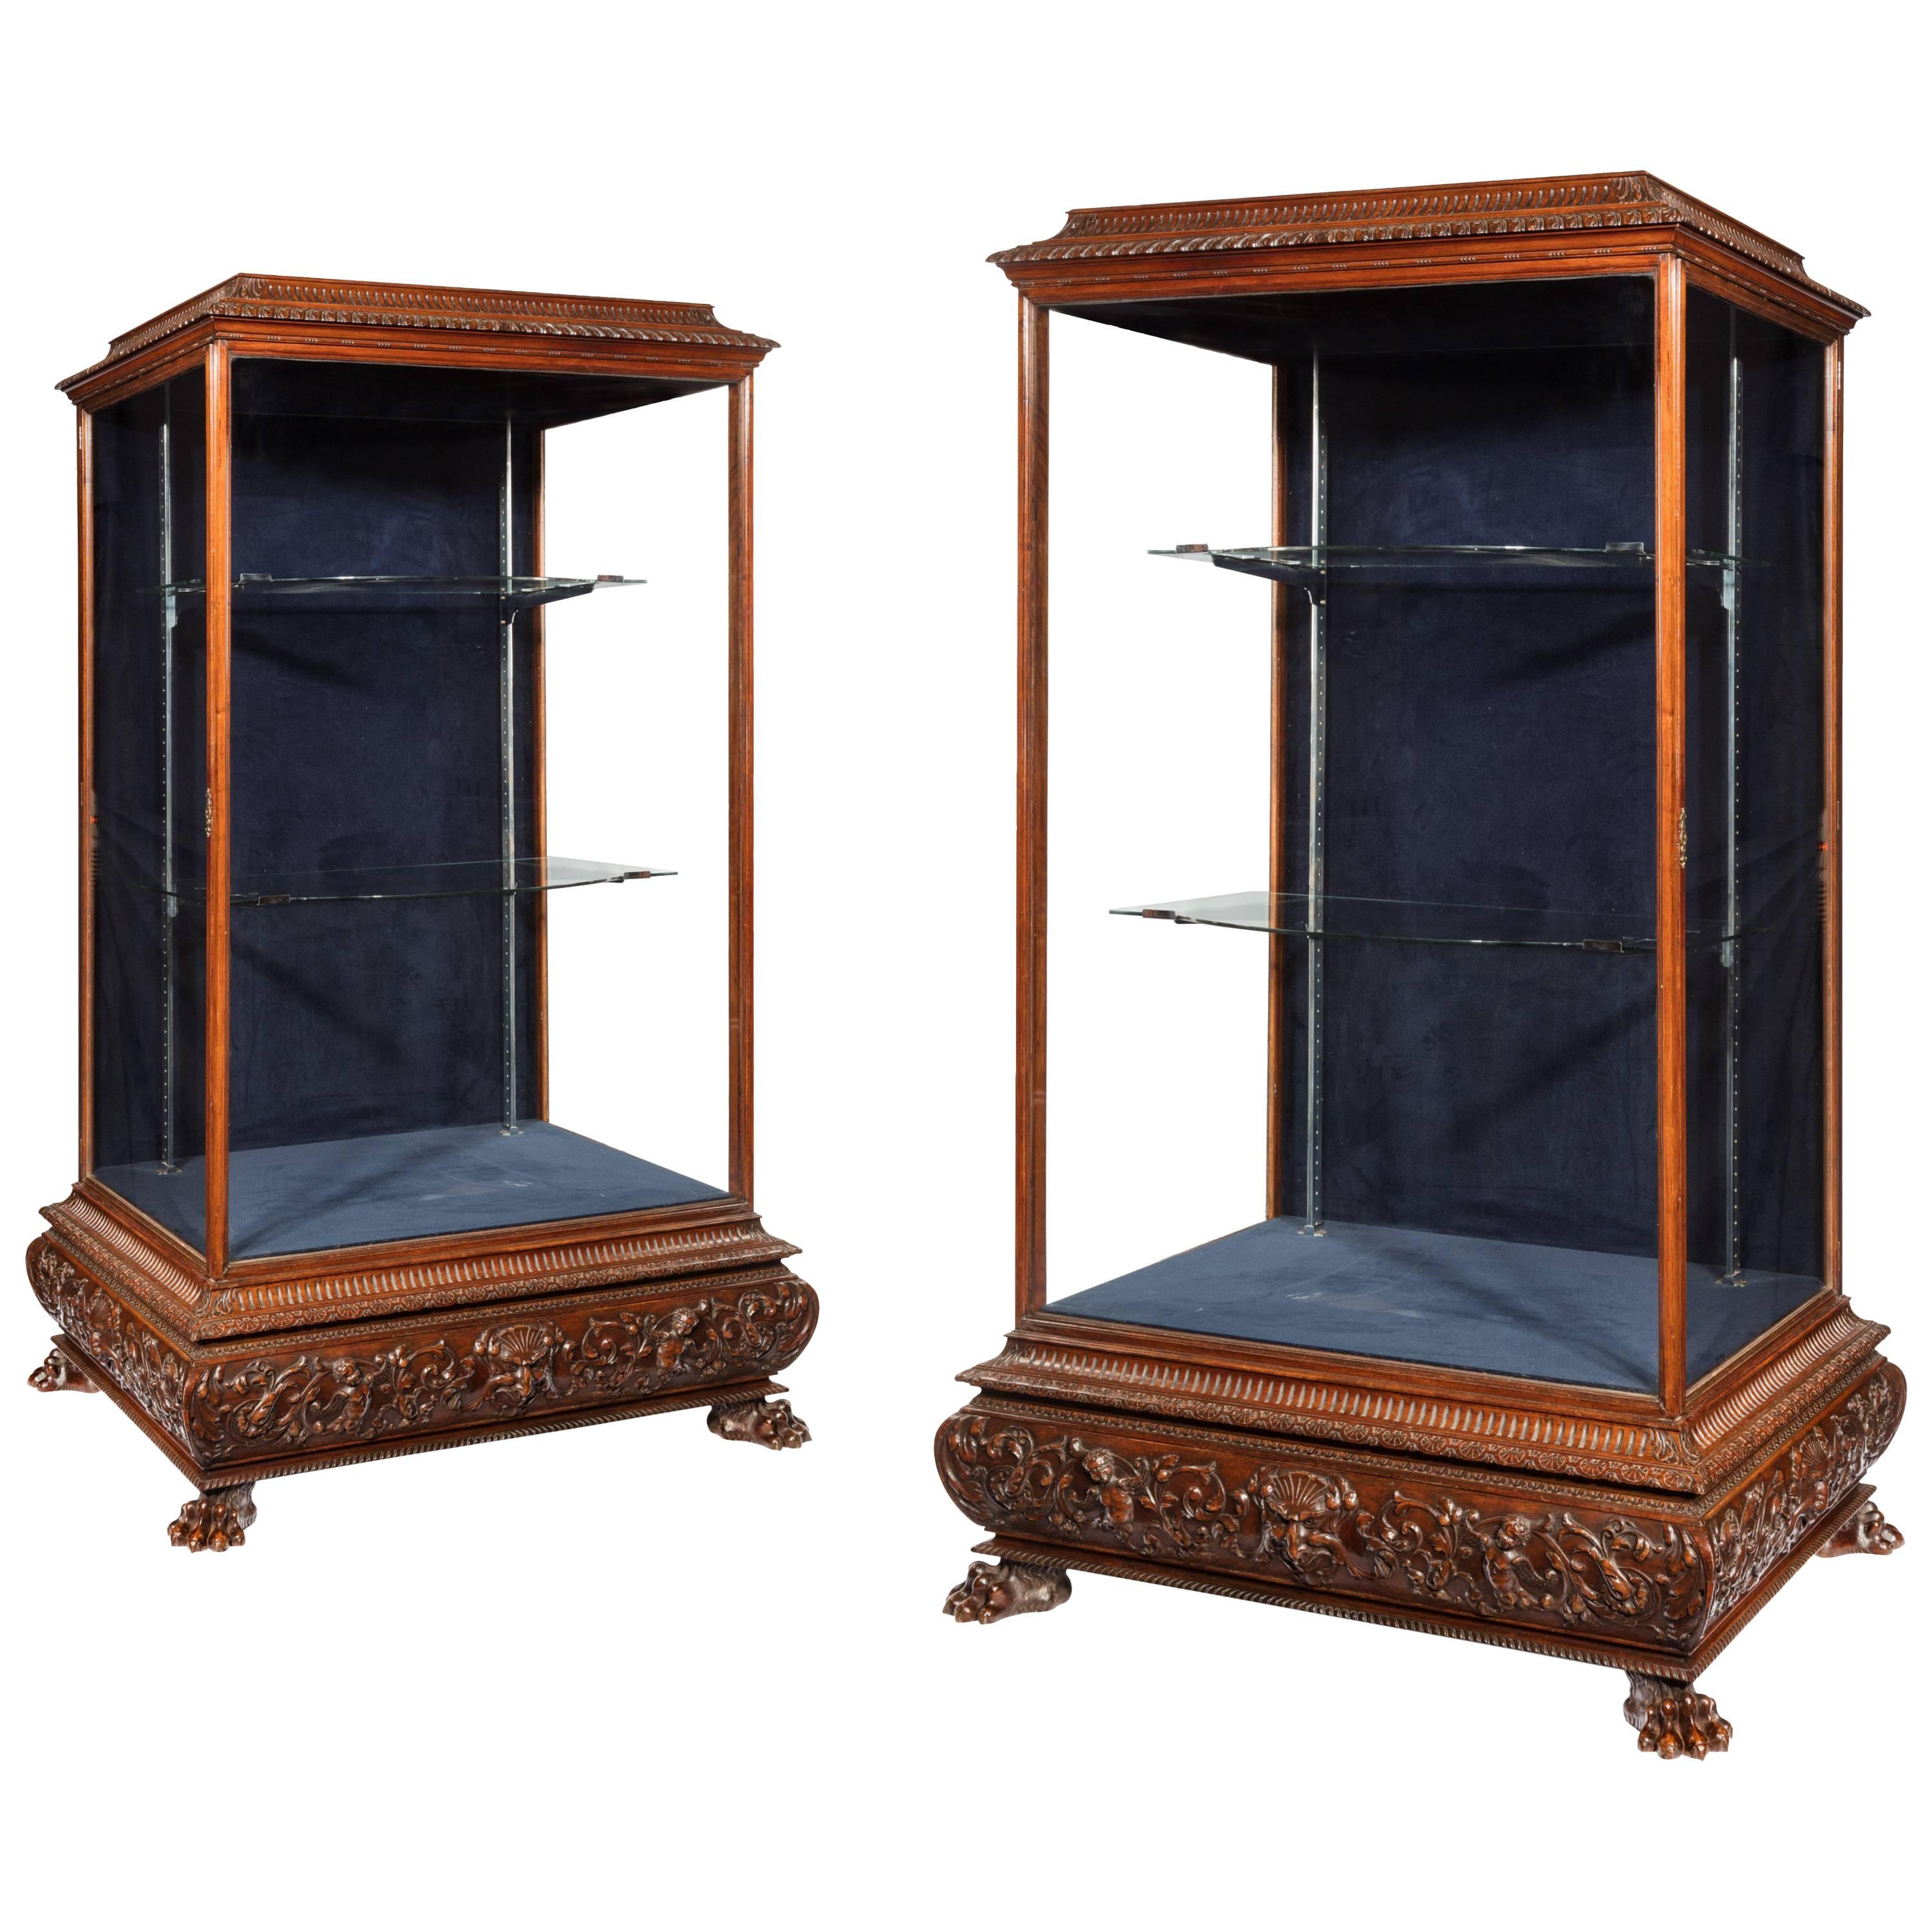 Magnificent Pair of 19th Century Display Cabinets